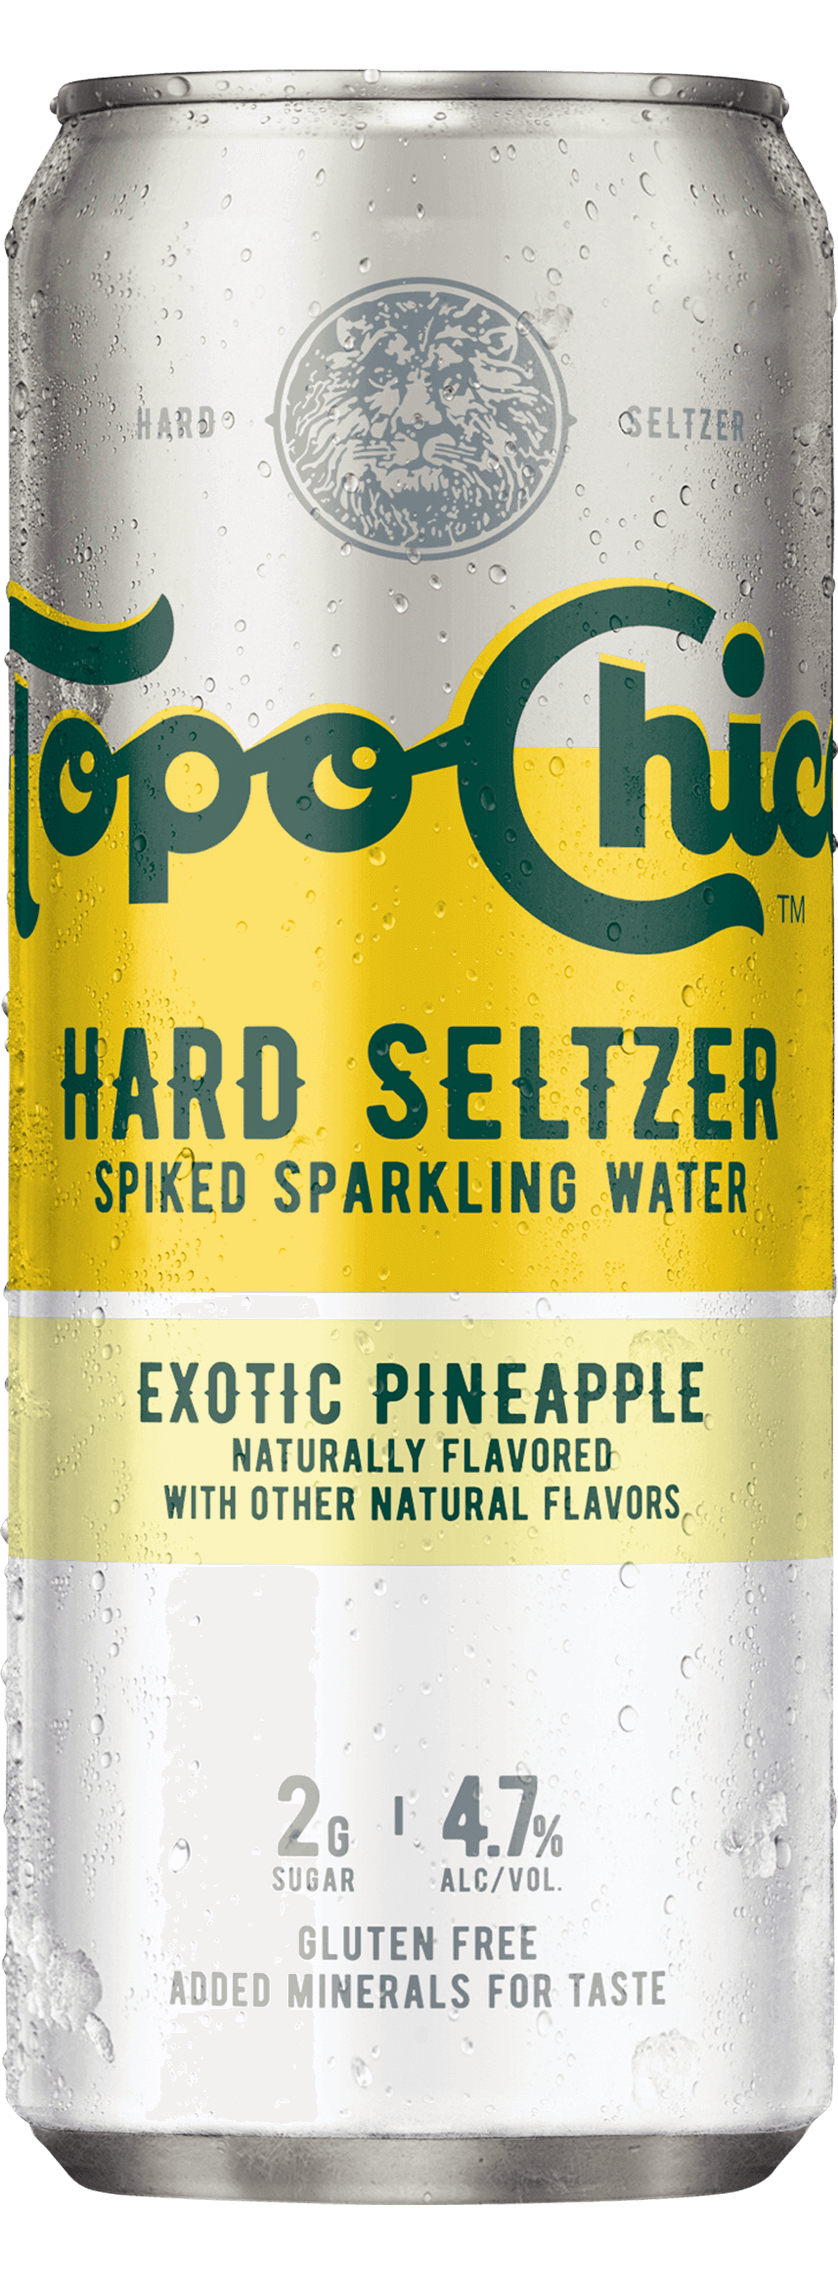 Exotic Pineapple can